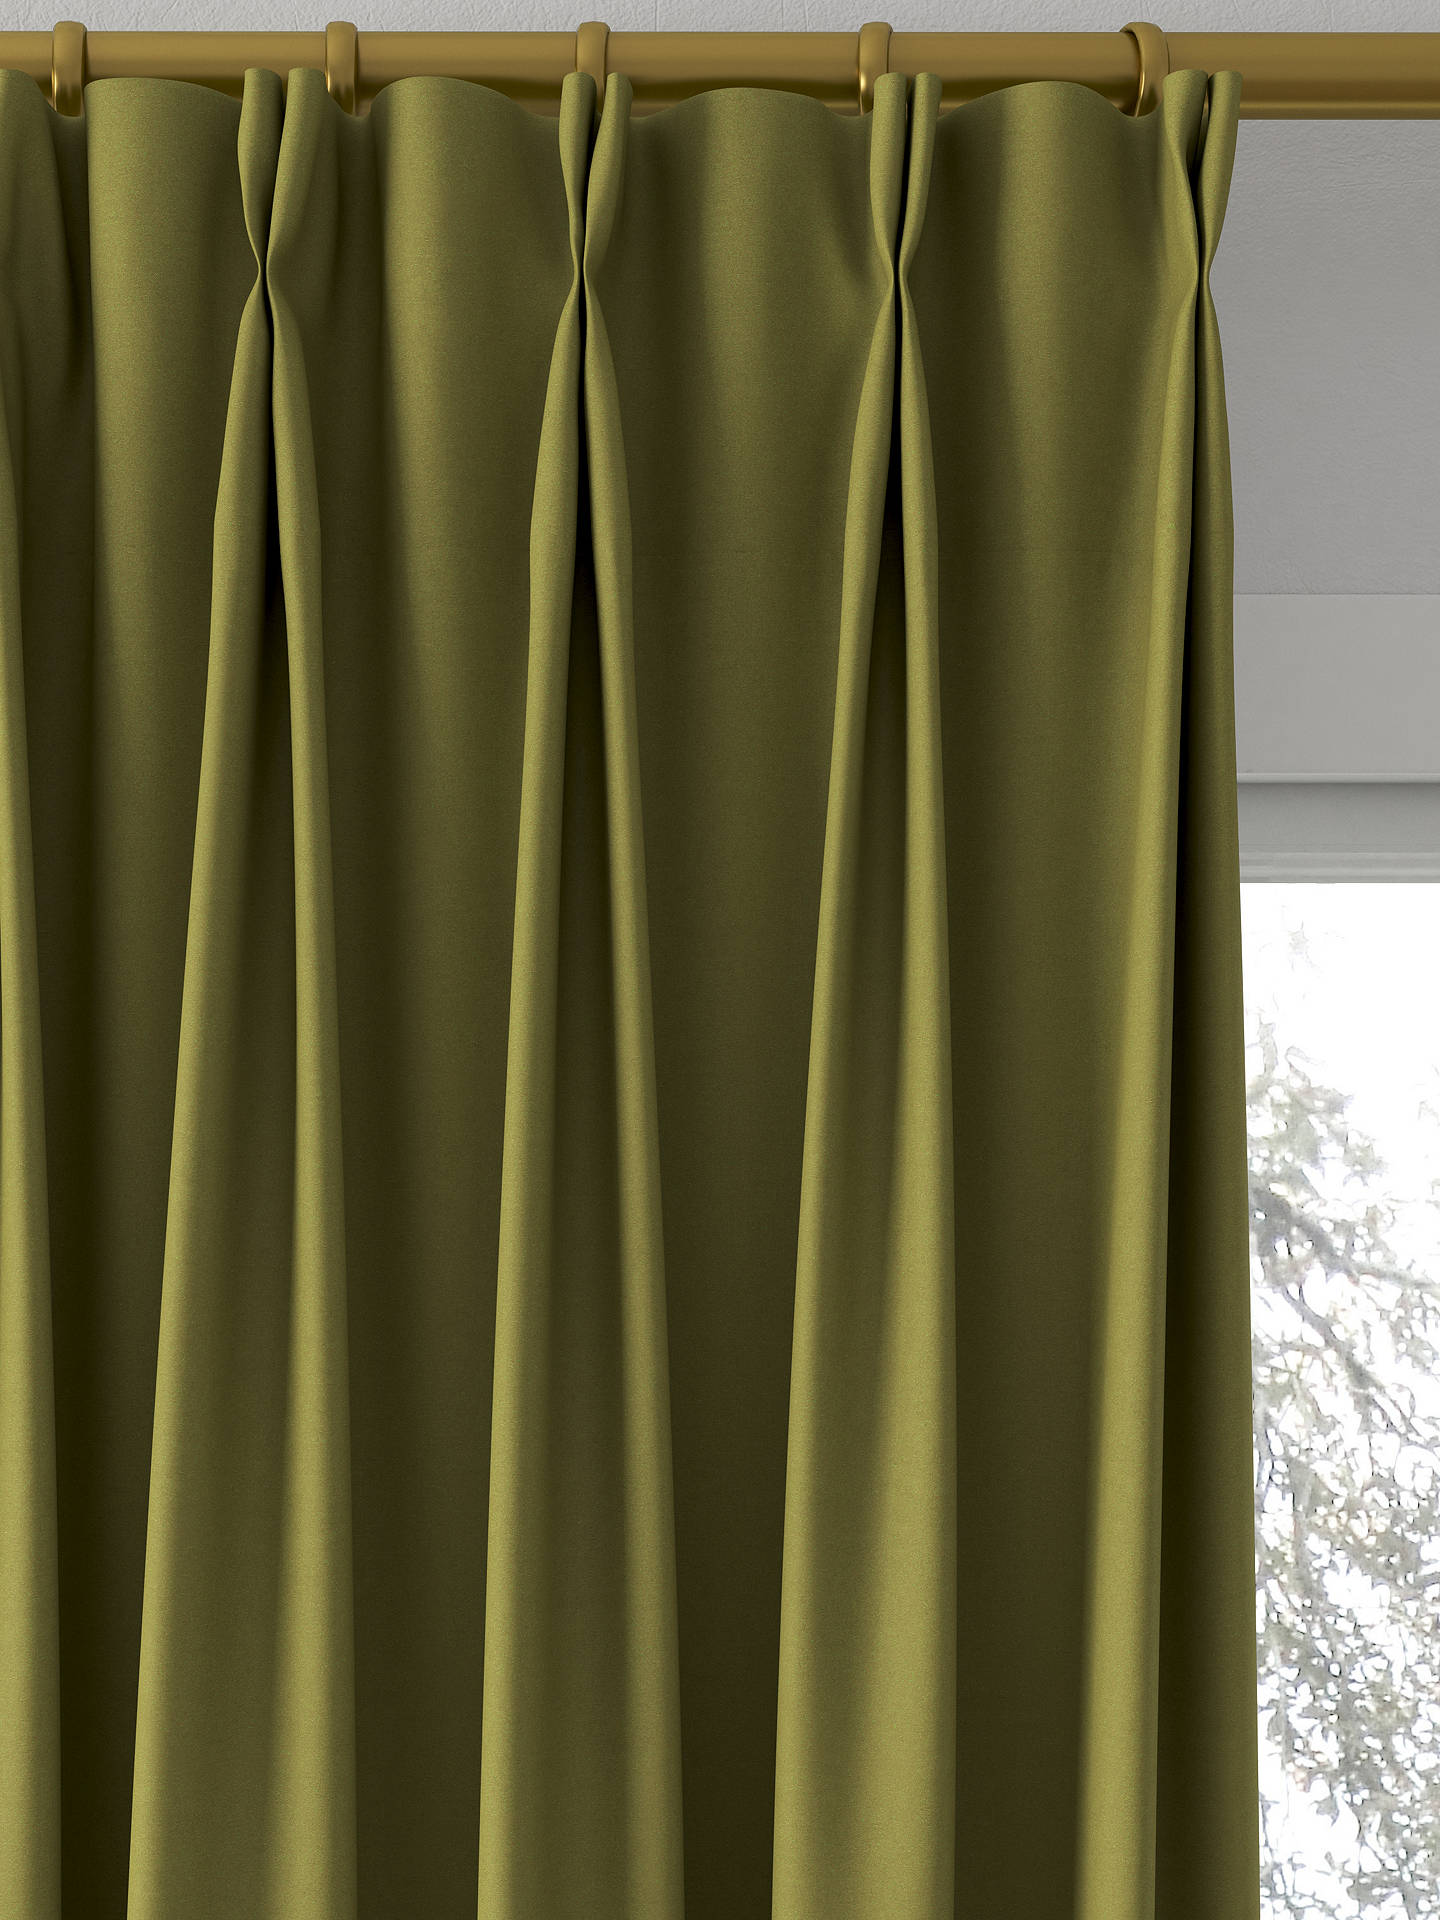 Harlequin Empower Plain Made to Measure Curtains, Olive